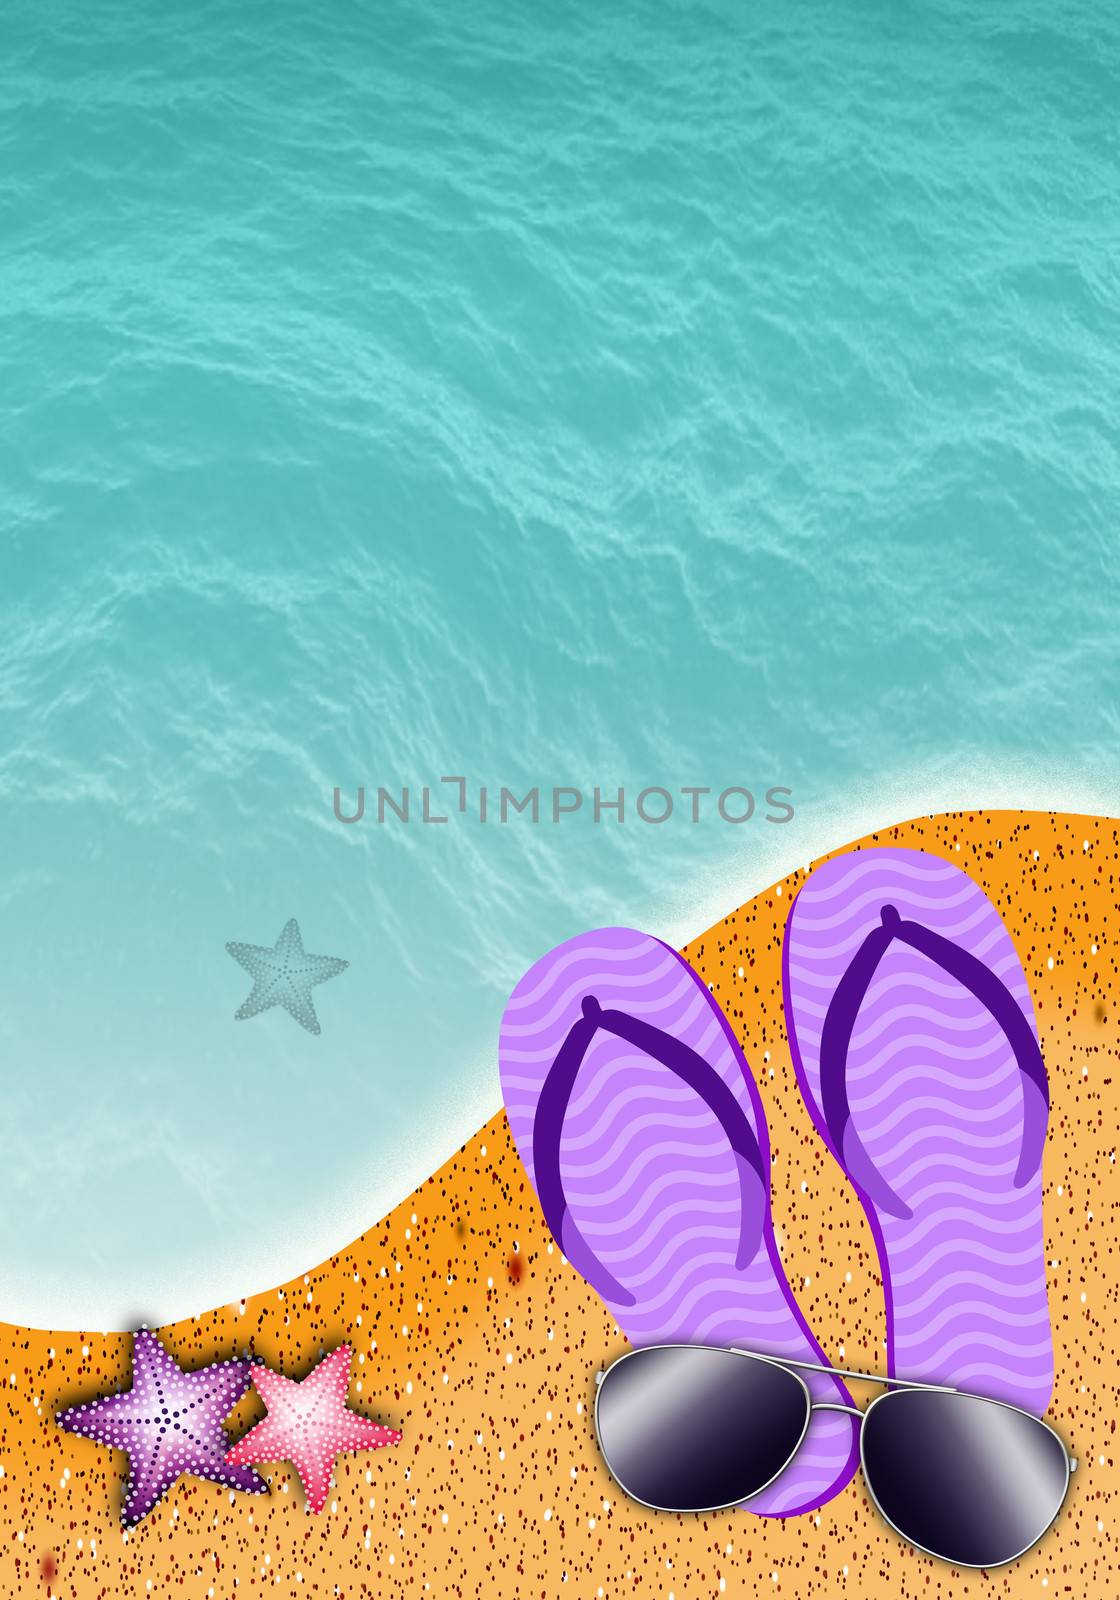 Flip-flop on the beach by sognolucido